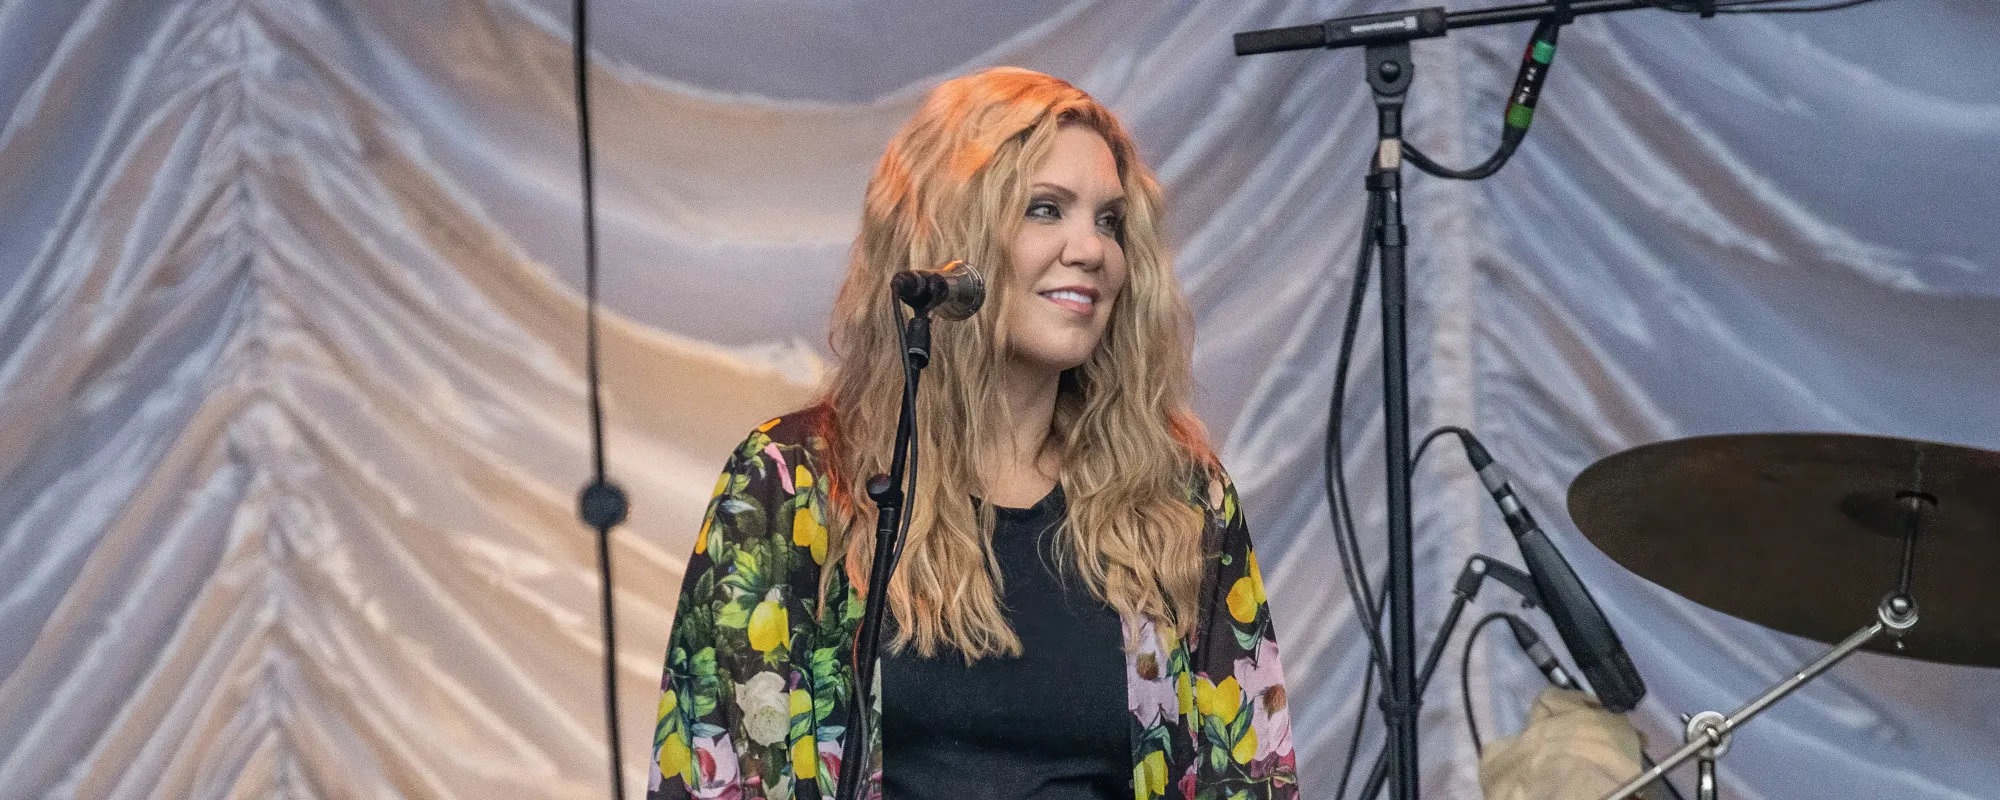 3 Albums You Didn’t Know Alison Krauss Produced